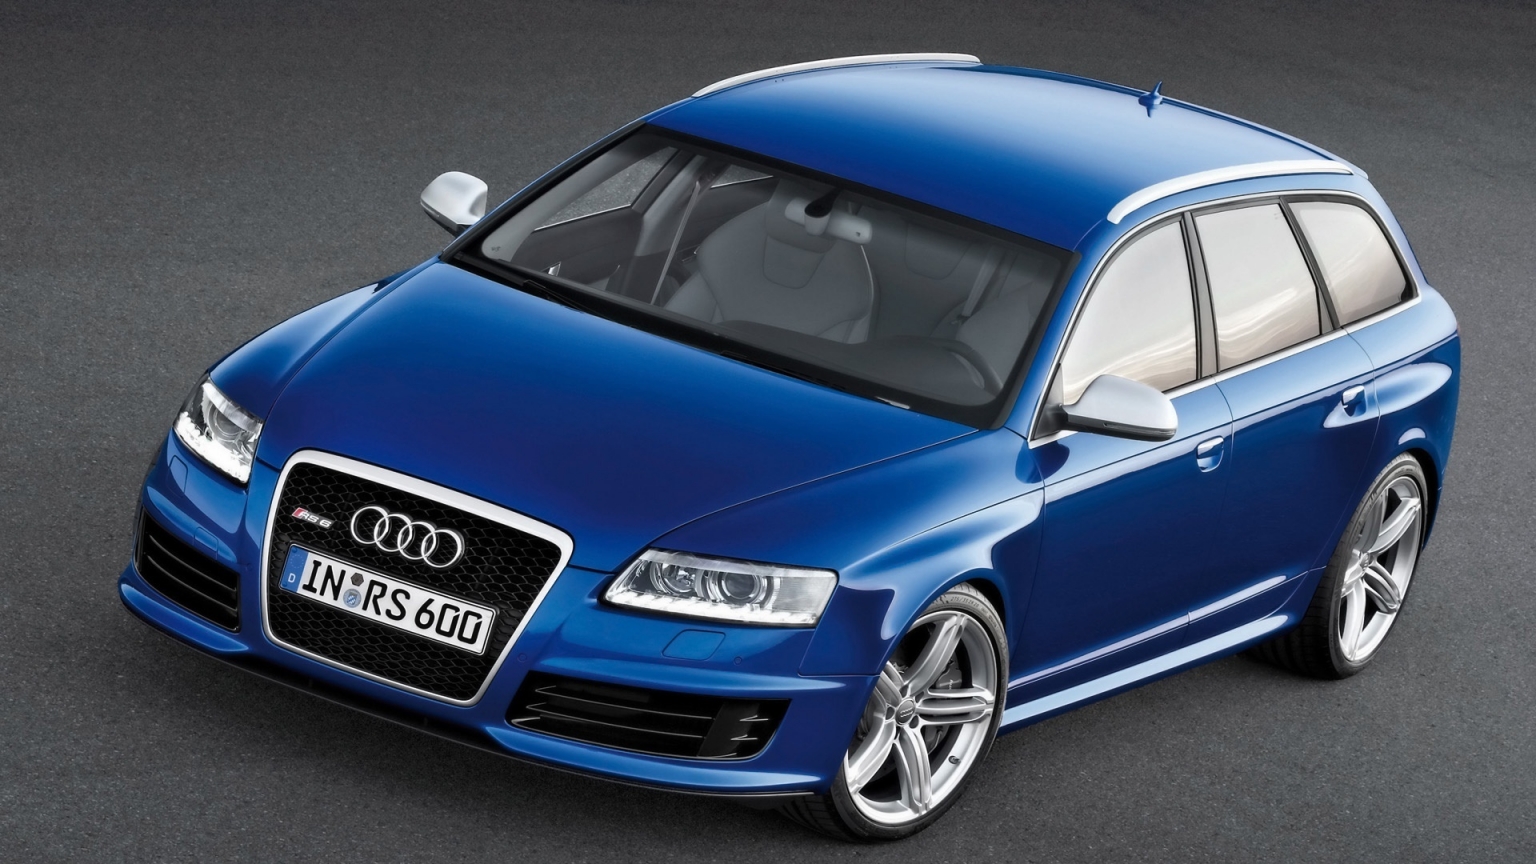 Audi RS6 Avant Front And Side 2008 for 1536 x 864 HDTV resolution